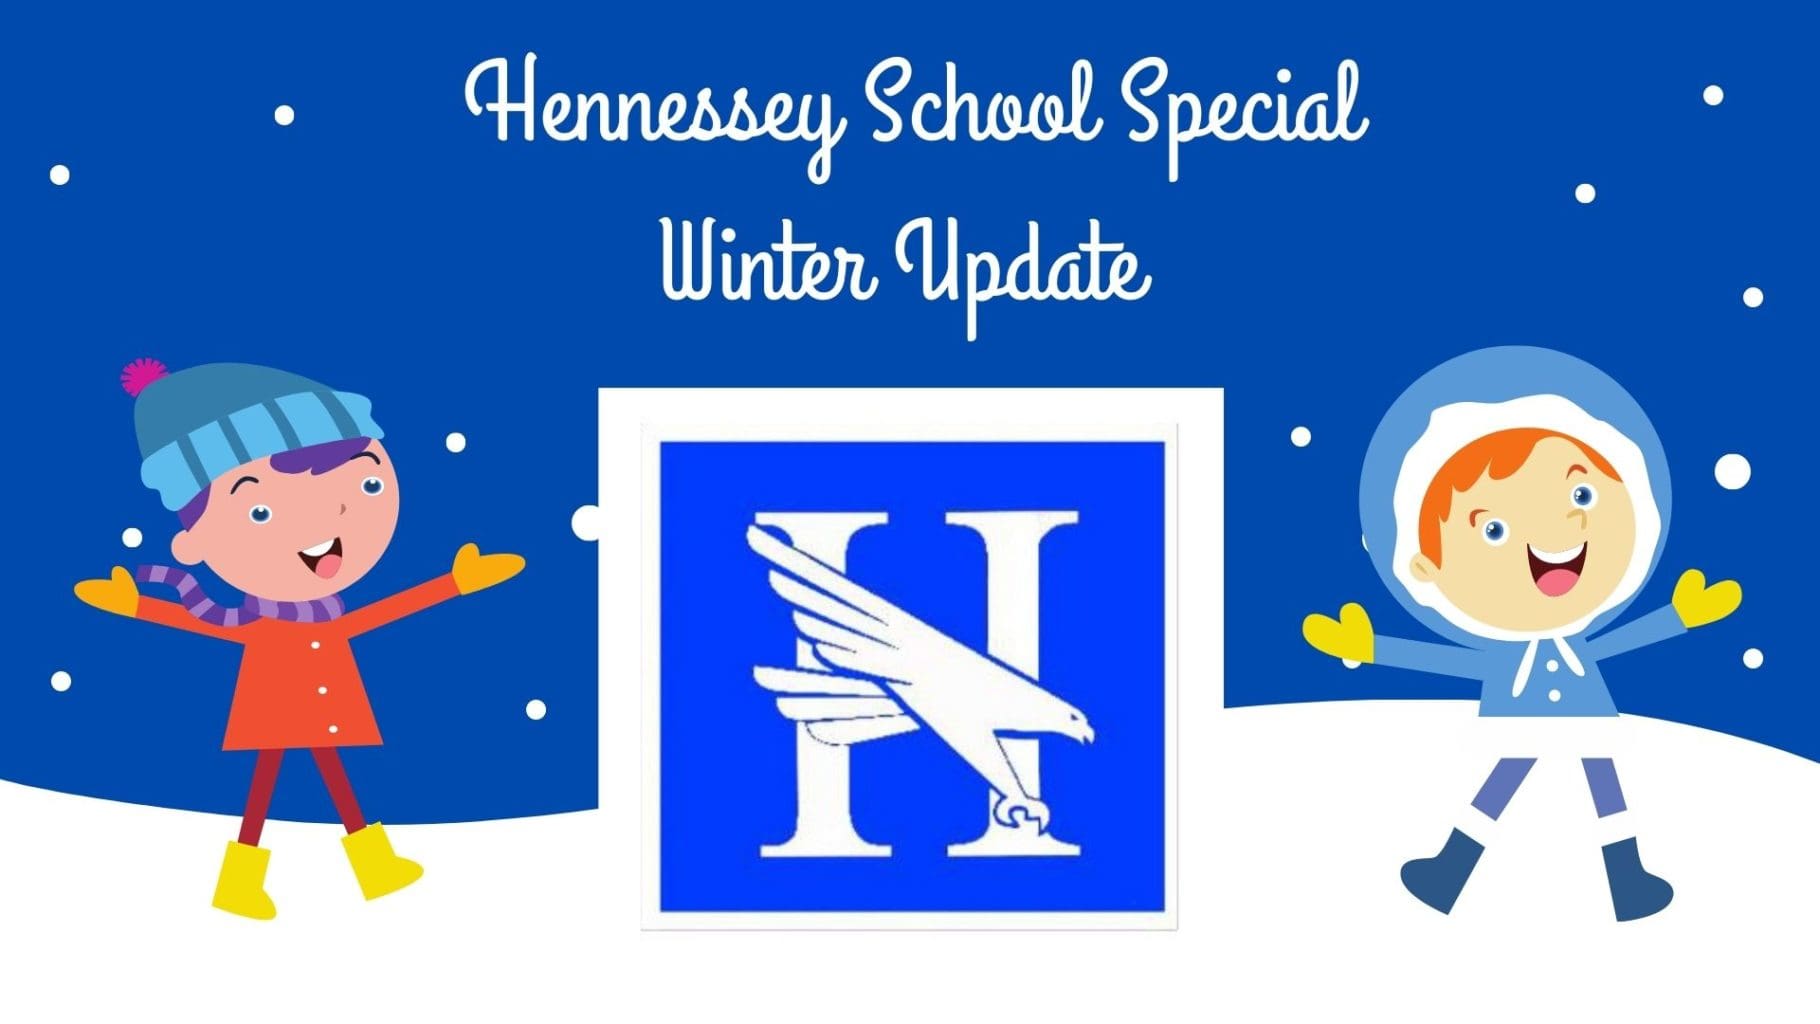 SPECIAL HENNESSEY SCHOOL WEATHER CHANGES